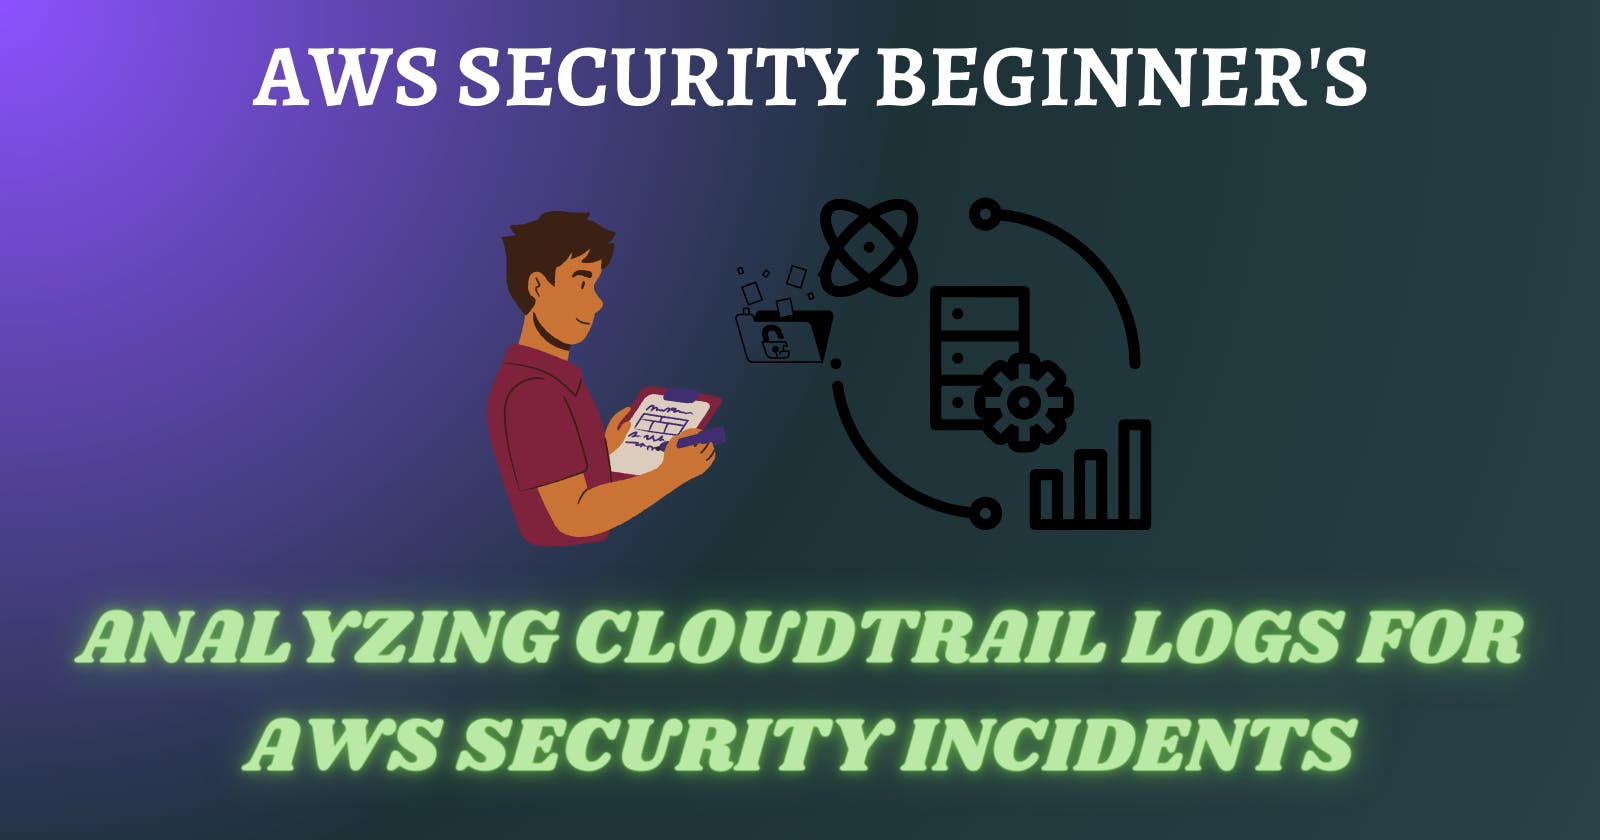 Analyzing CloudTrail Logs for AWS Security Incidents.